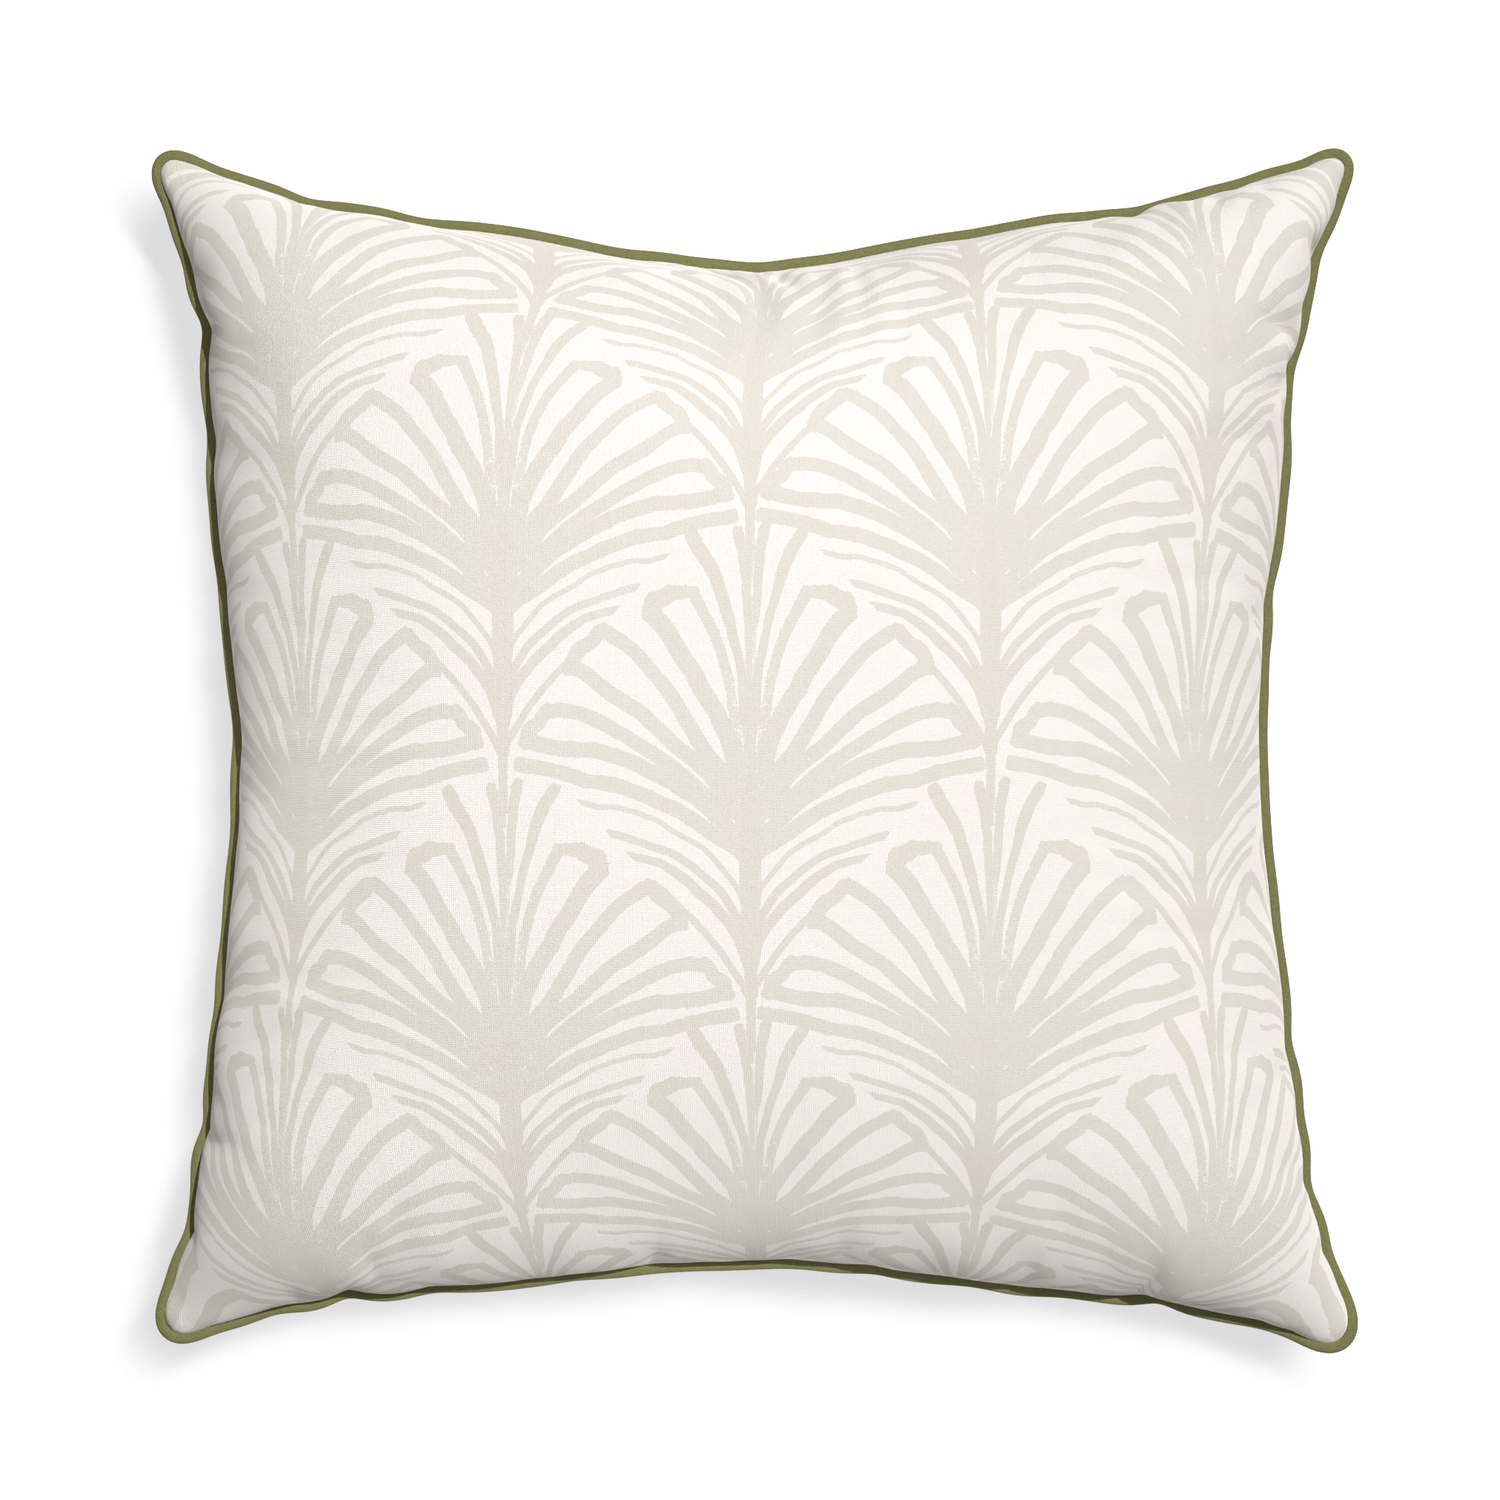 Euro-sham suzy sand custom pillow with moss piping on white background